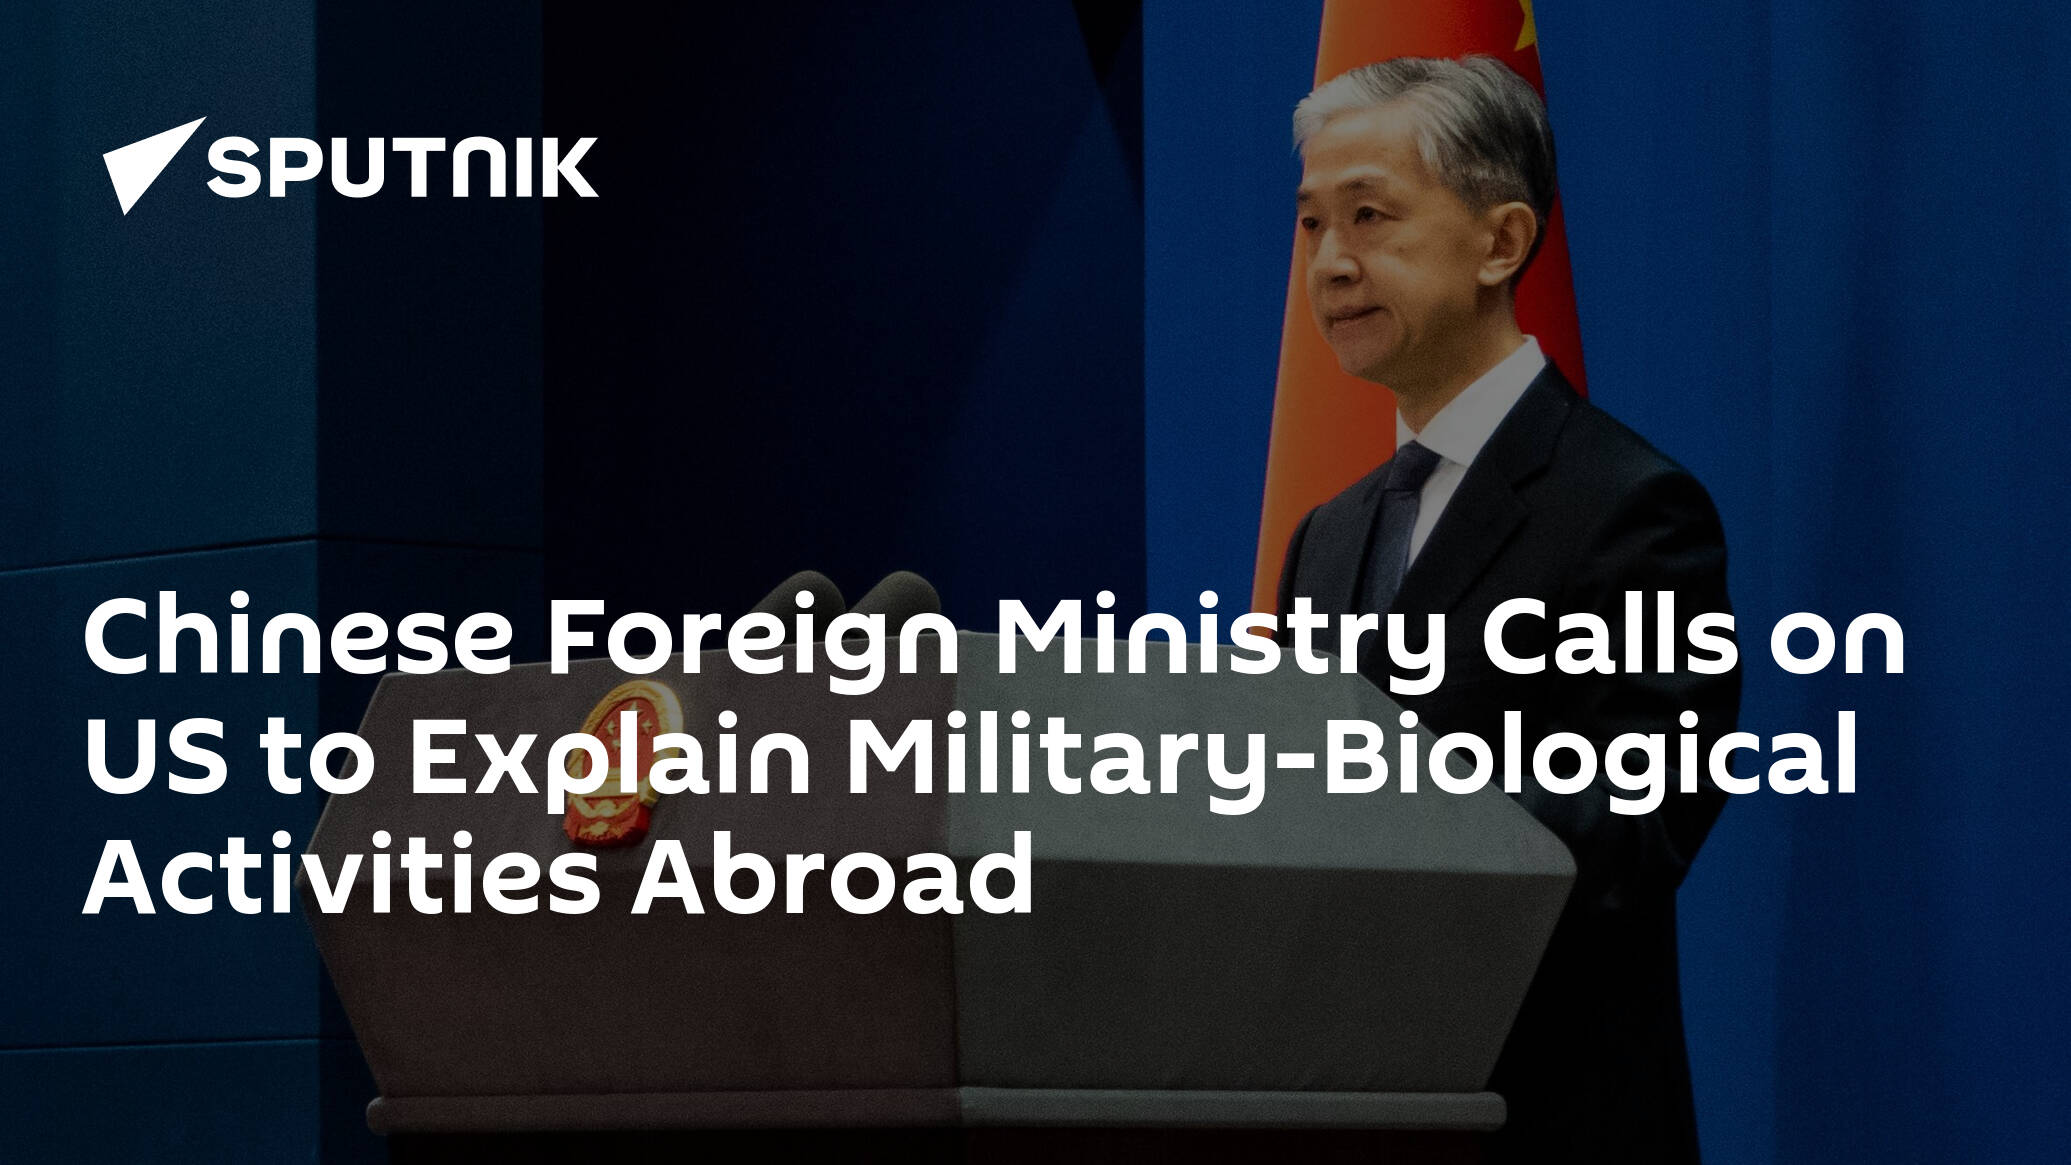 Chinese Foreign Ministry Calls on US to Explain Military-Biological Activities Abroad